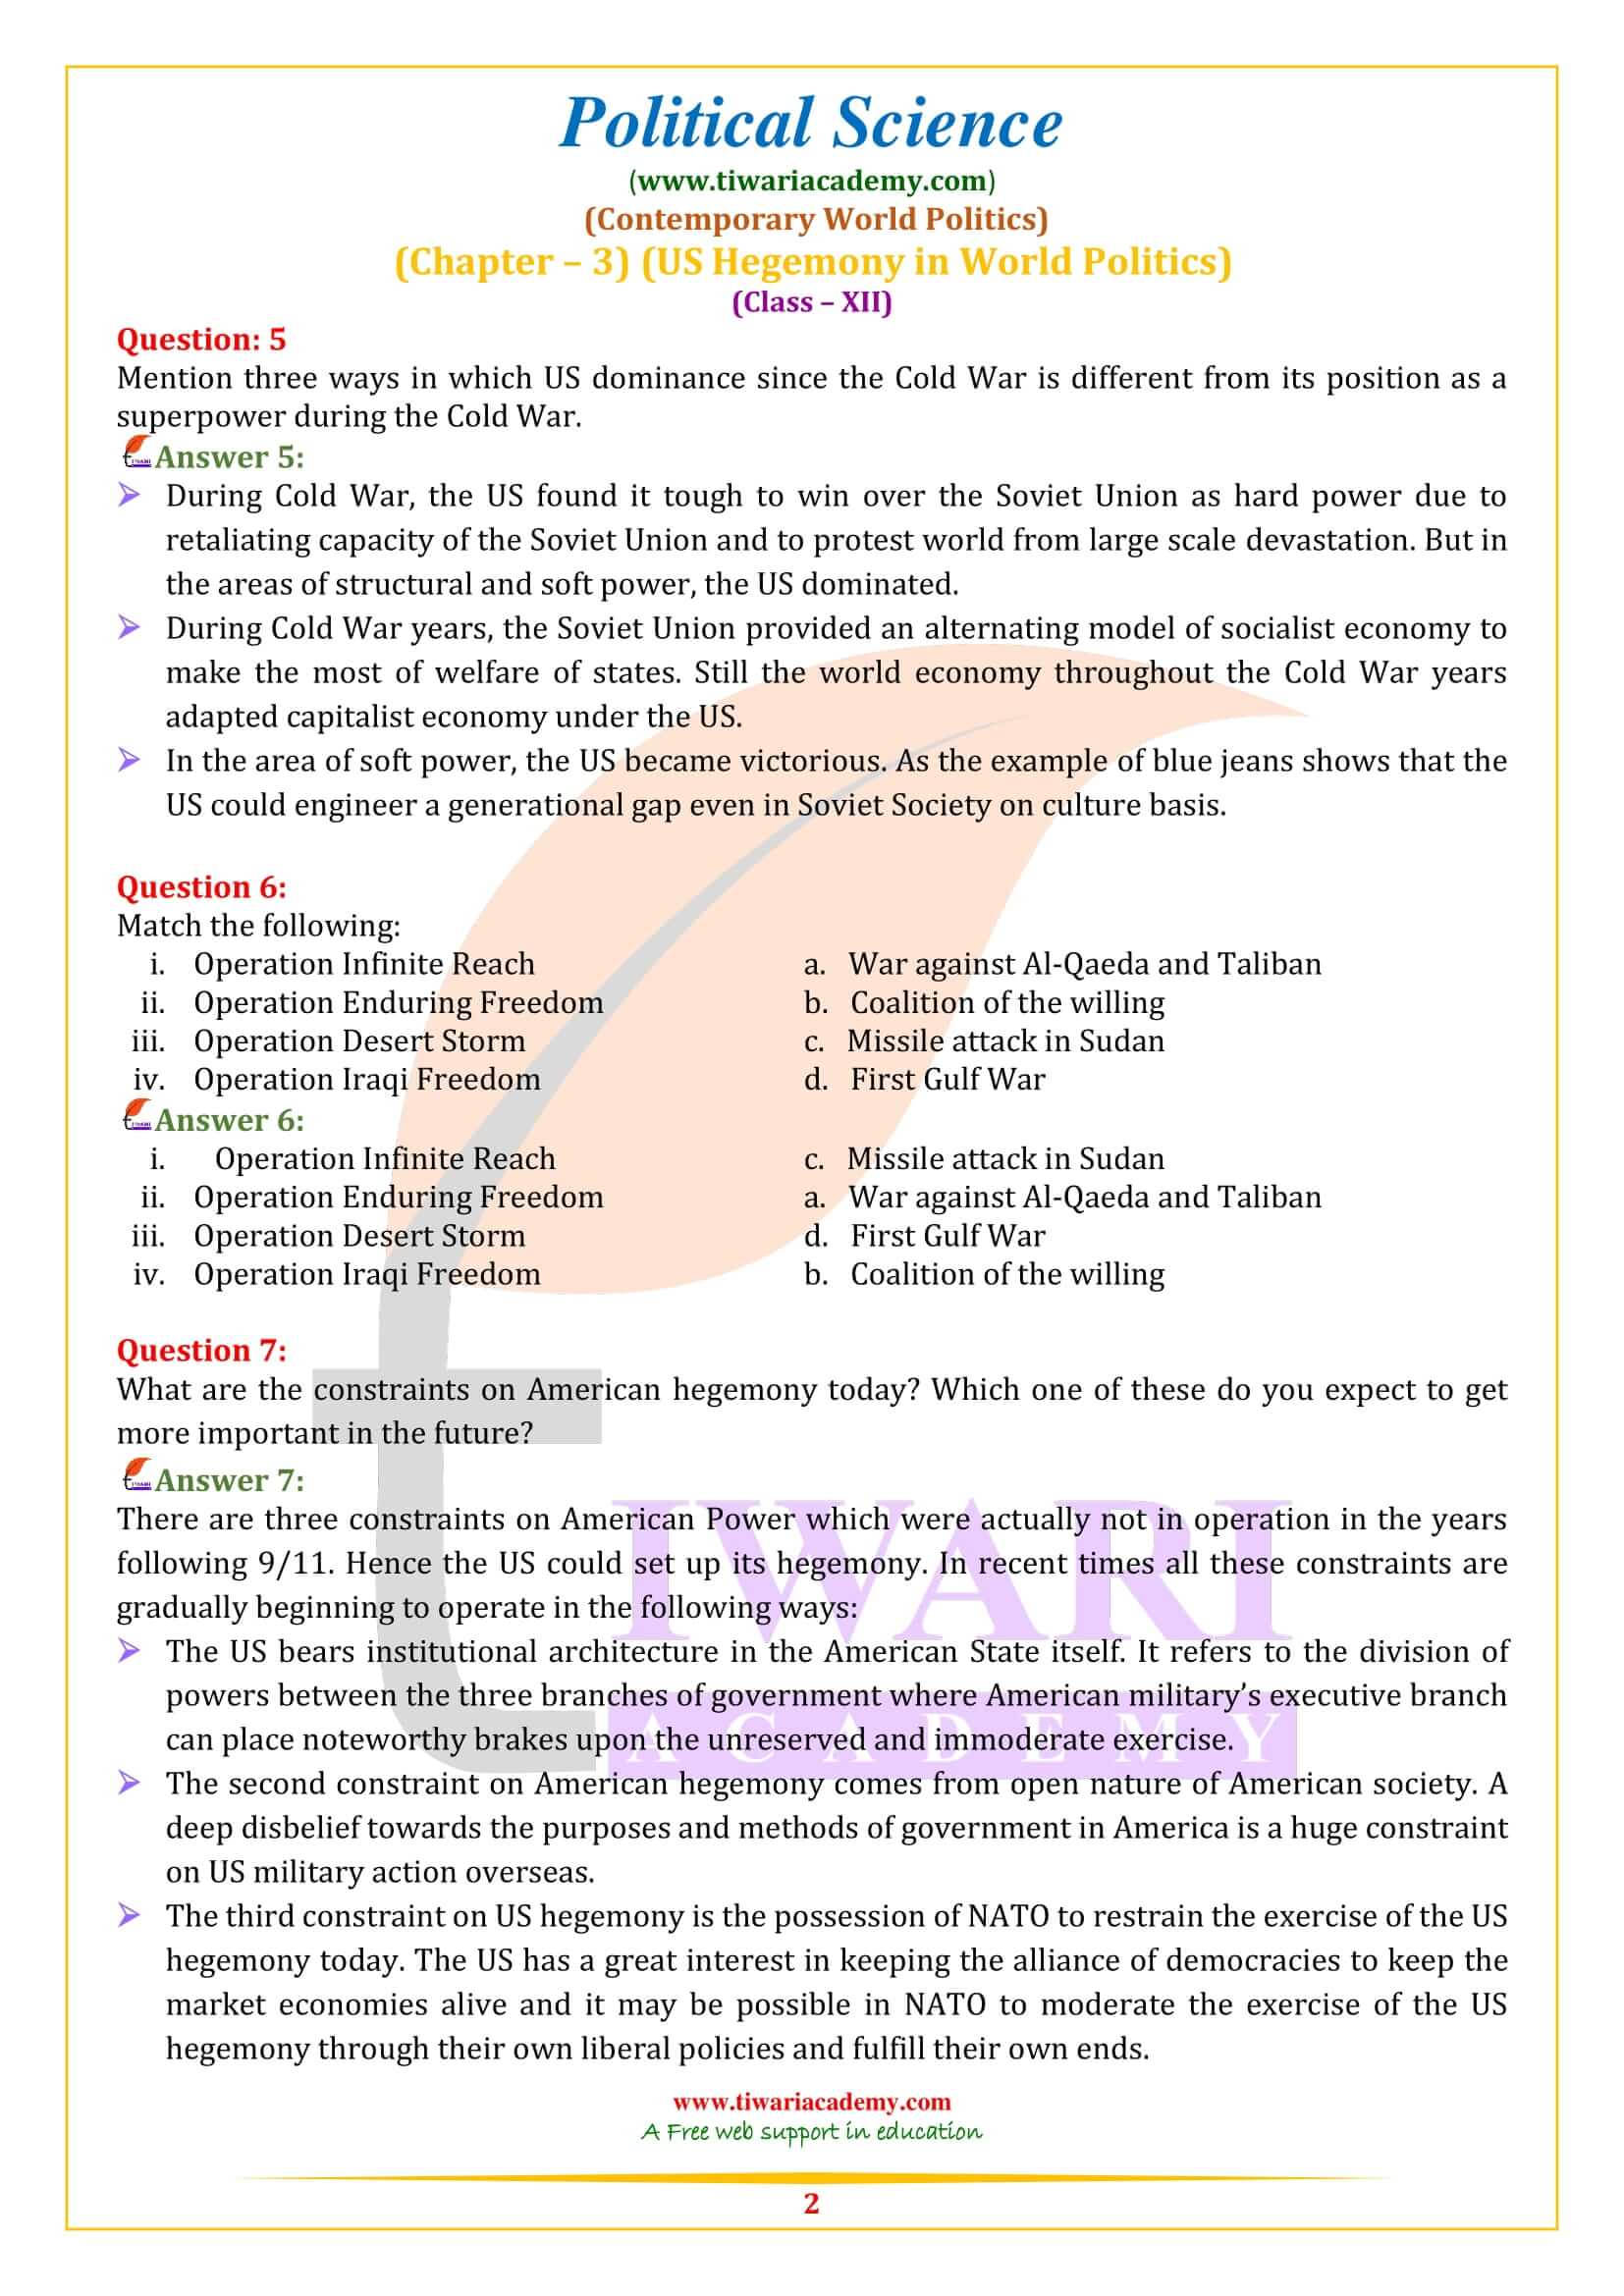 NCERT Solutions for Class 12 Political Science Chapter 3